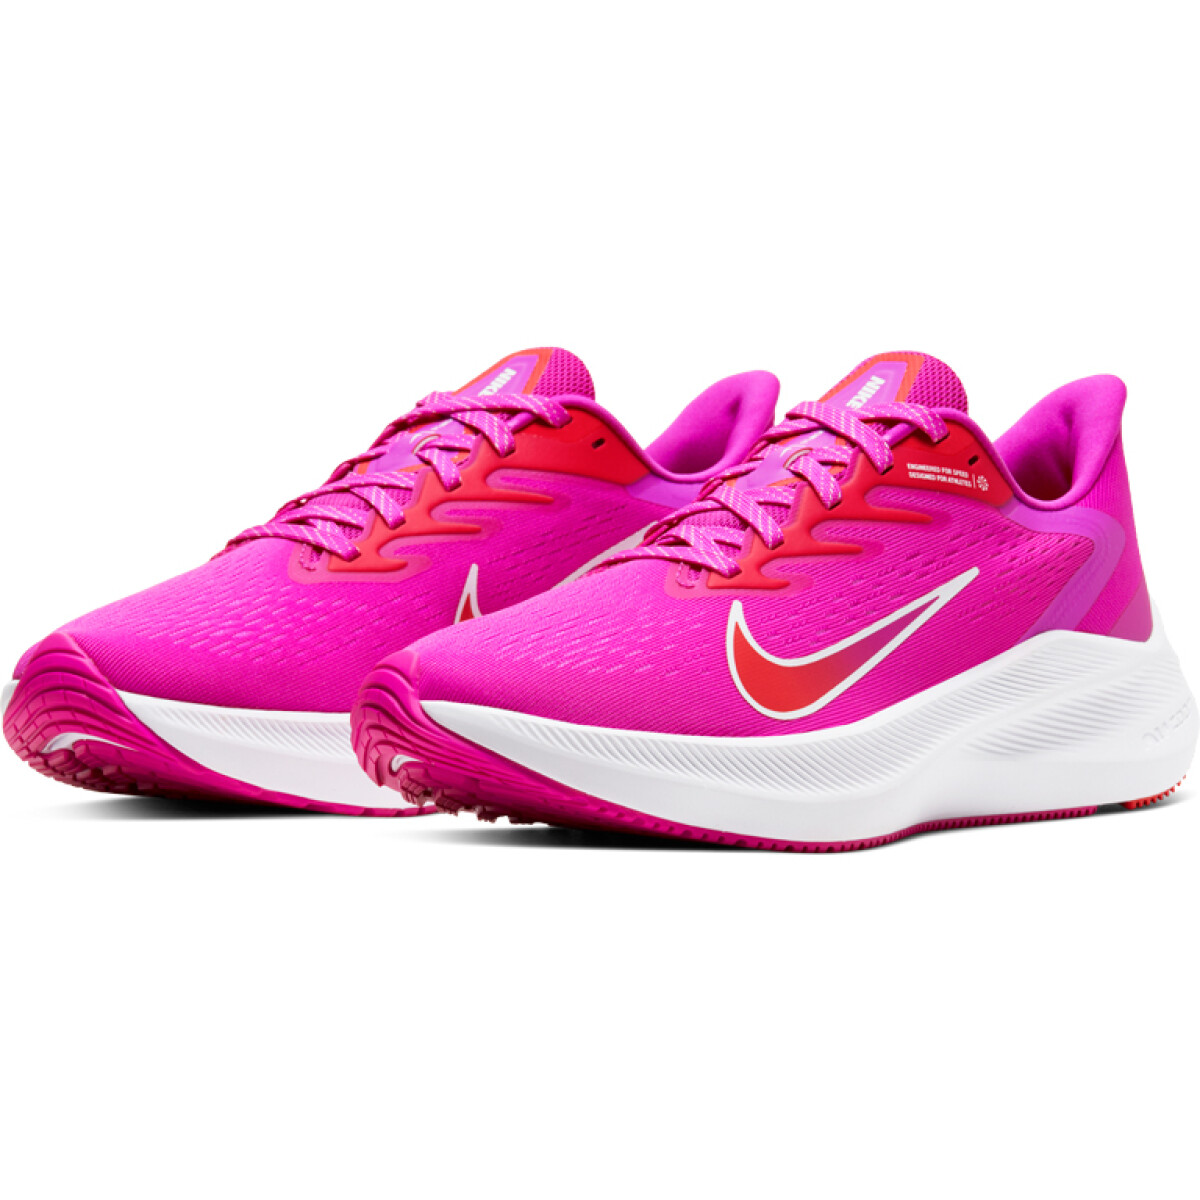 Champion Nike Running dama Zoom Winflo 7 FIRE PINK/SMMT WHITE-EMBR - Color Único 